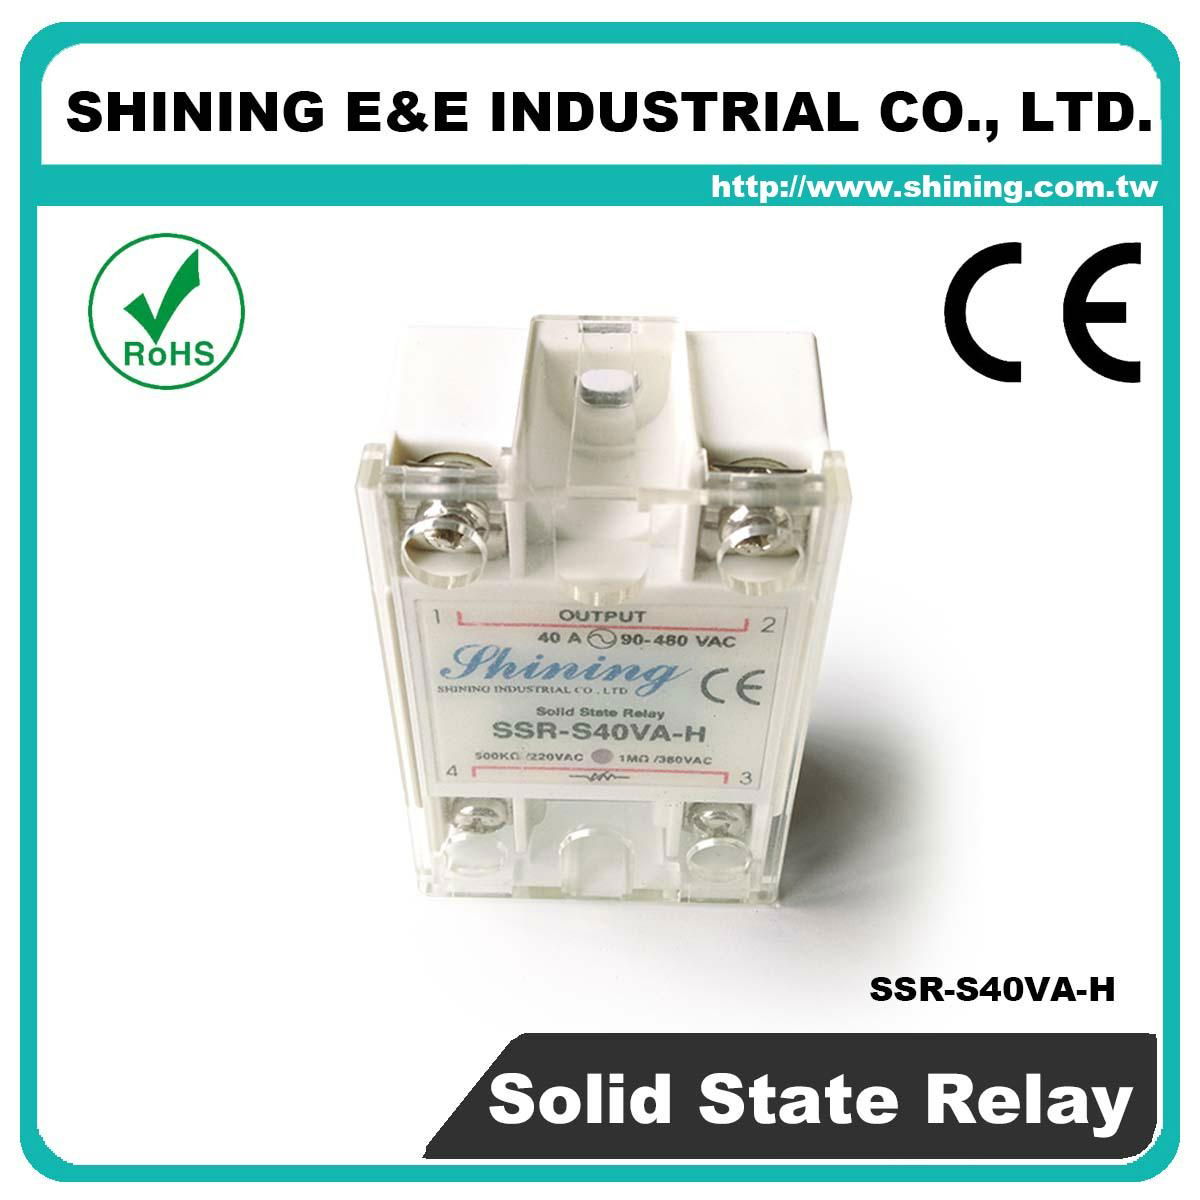 SSR-S40VA-H VR to AC Phase Control Adjustable Solid State Relays 3